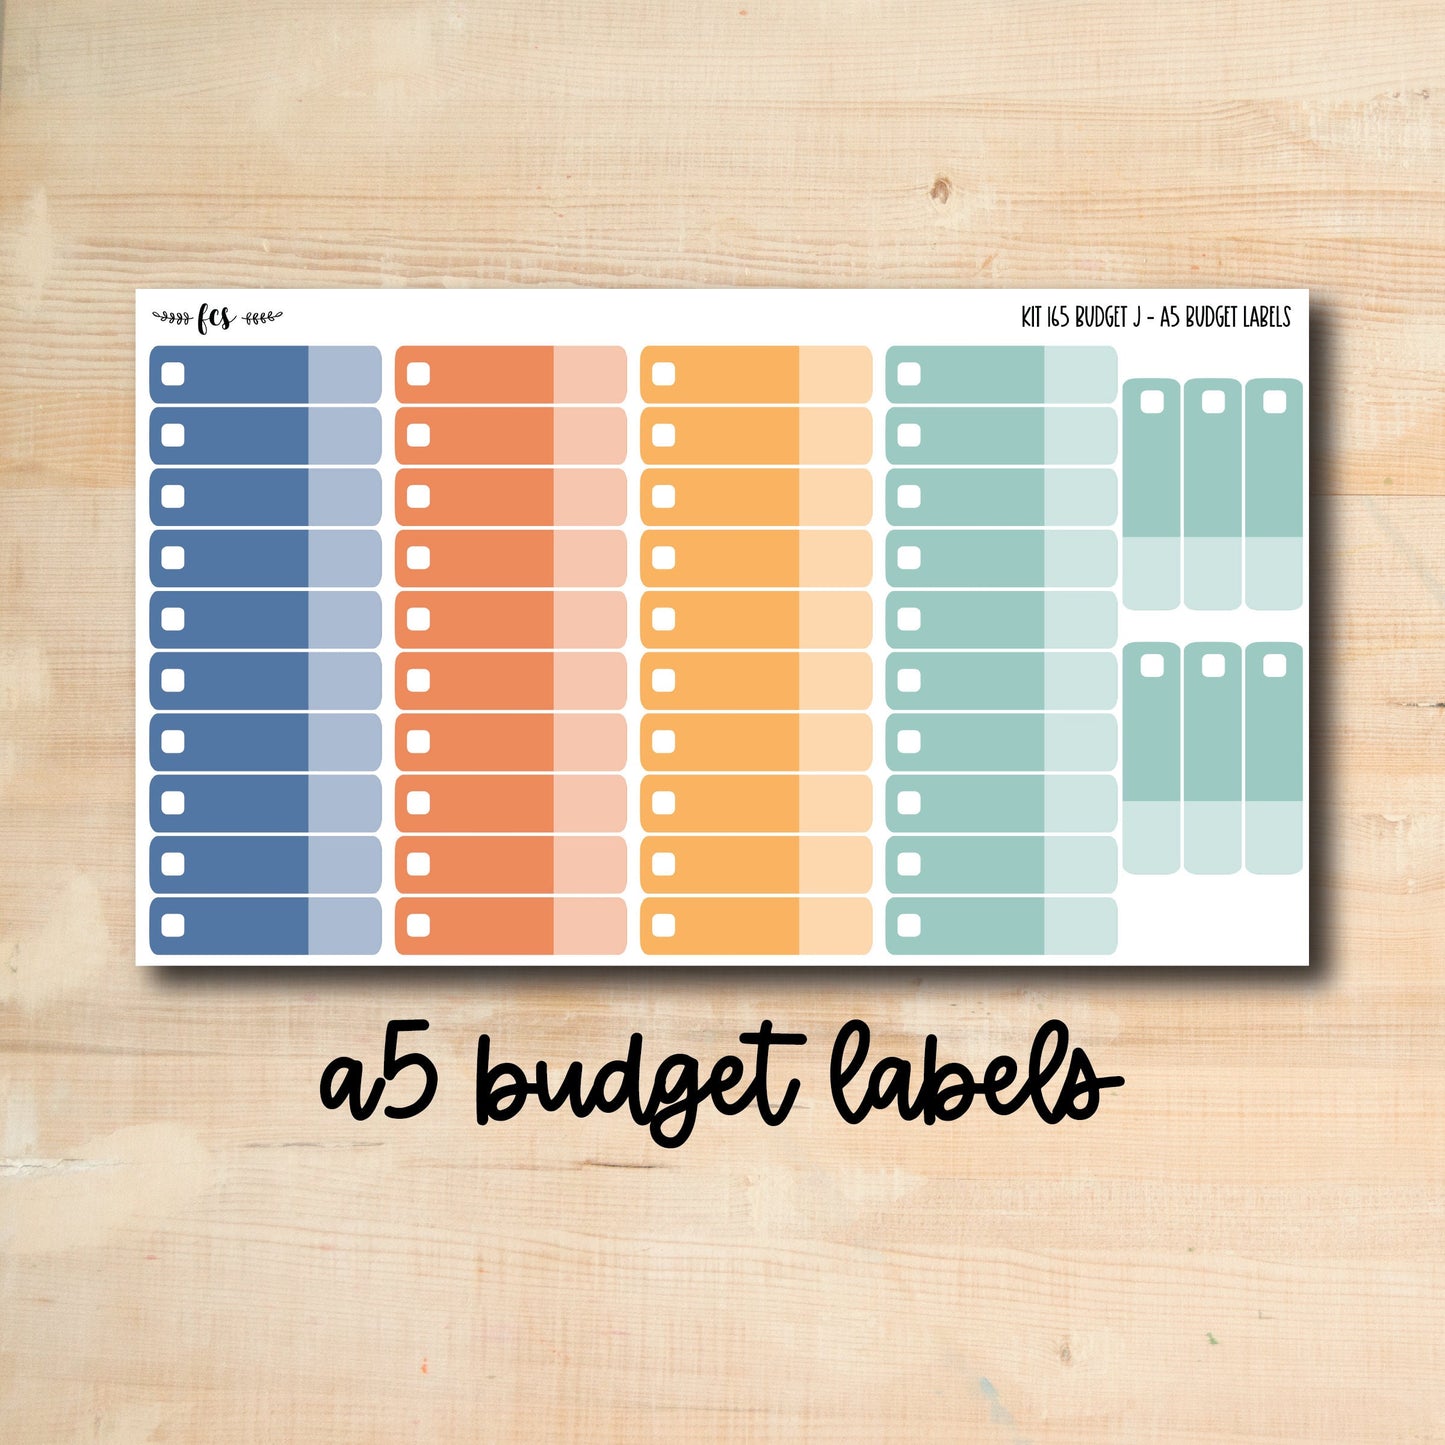 BUDGET-165 || BEAUTIFUL DAY A5 budget labels